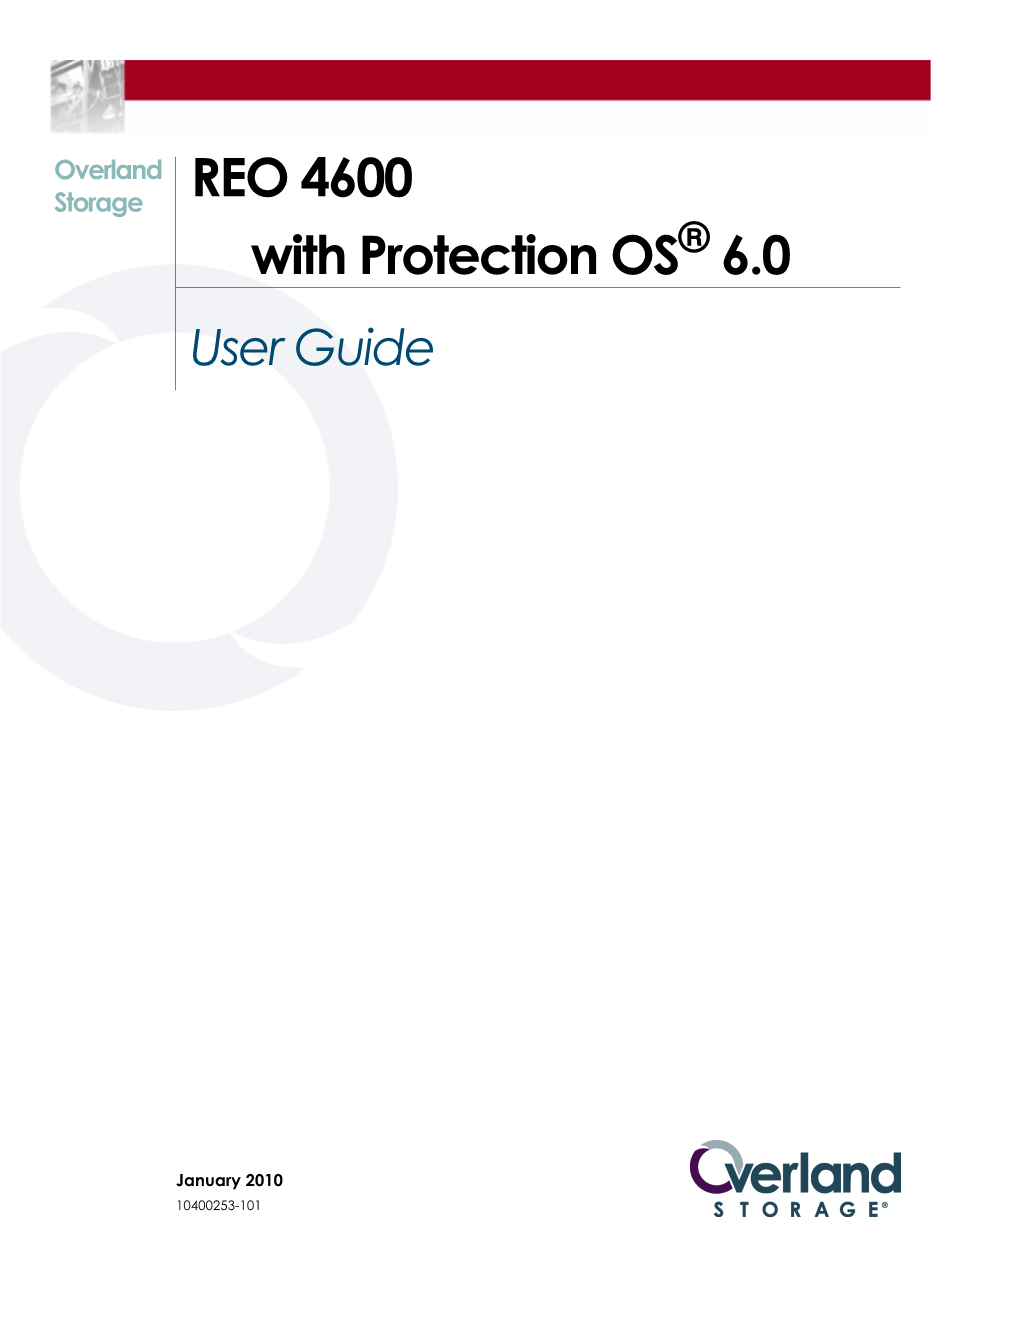 REO 4600 with Protection OS 6.0 Users Guide